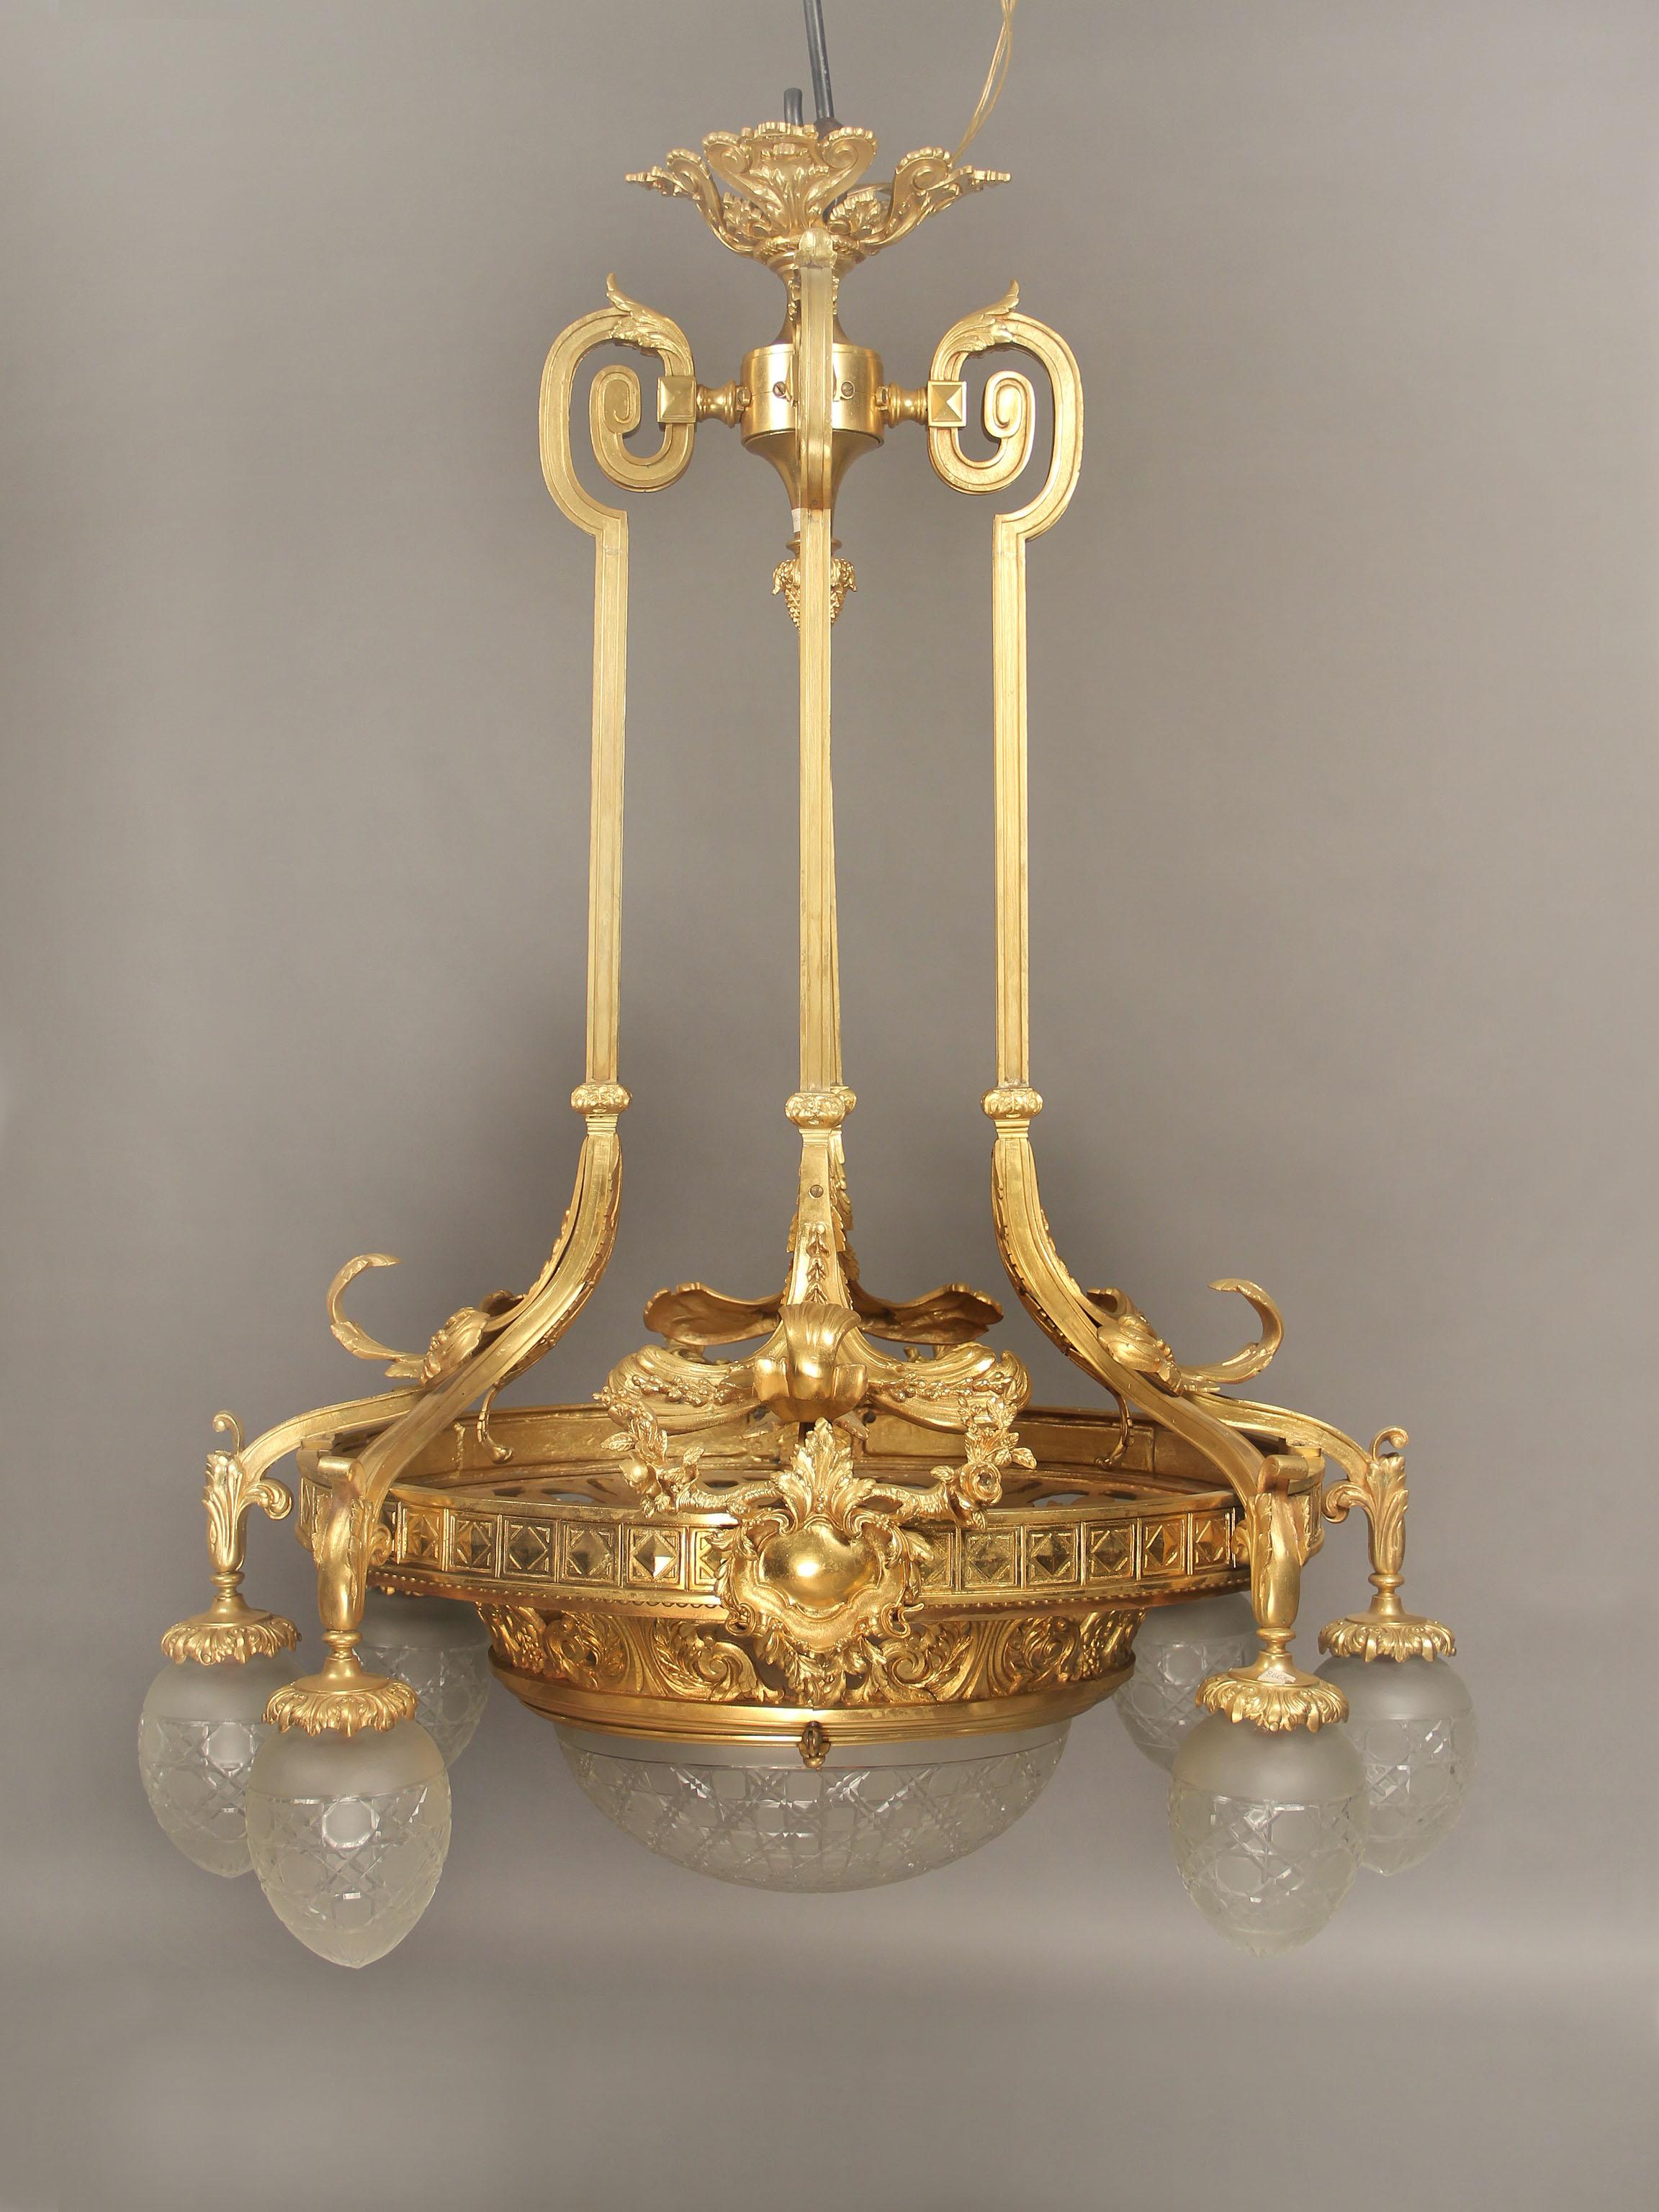 A wonderful early 20th century gilt bronze ten-light chandelier.

A long and oval bronze frame with casted scrolled arms extending to six perimeter lights with fine cut French crystal shades, the bottom centered with foliate designs and a matching